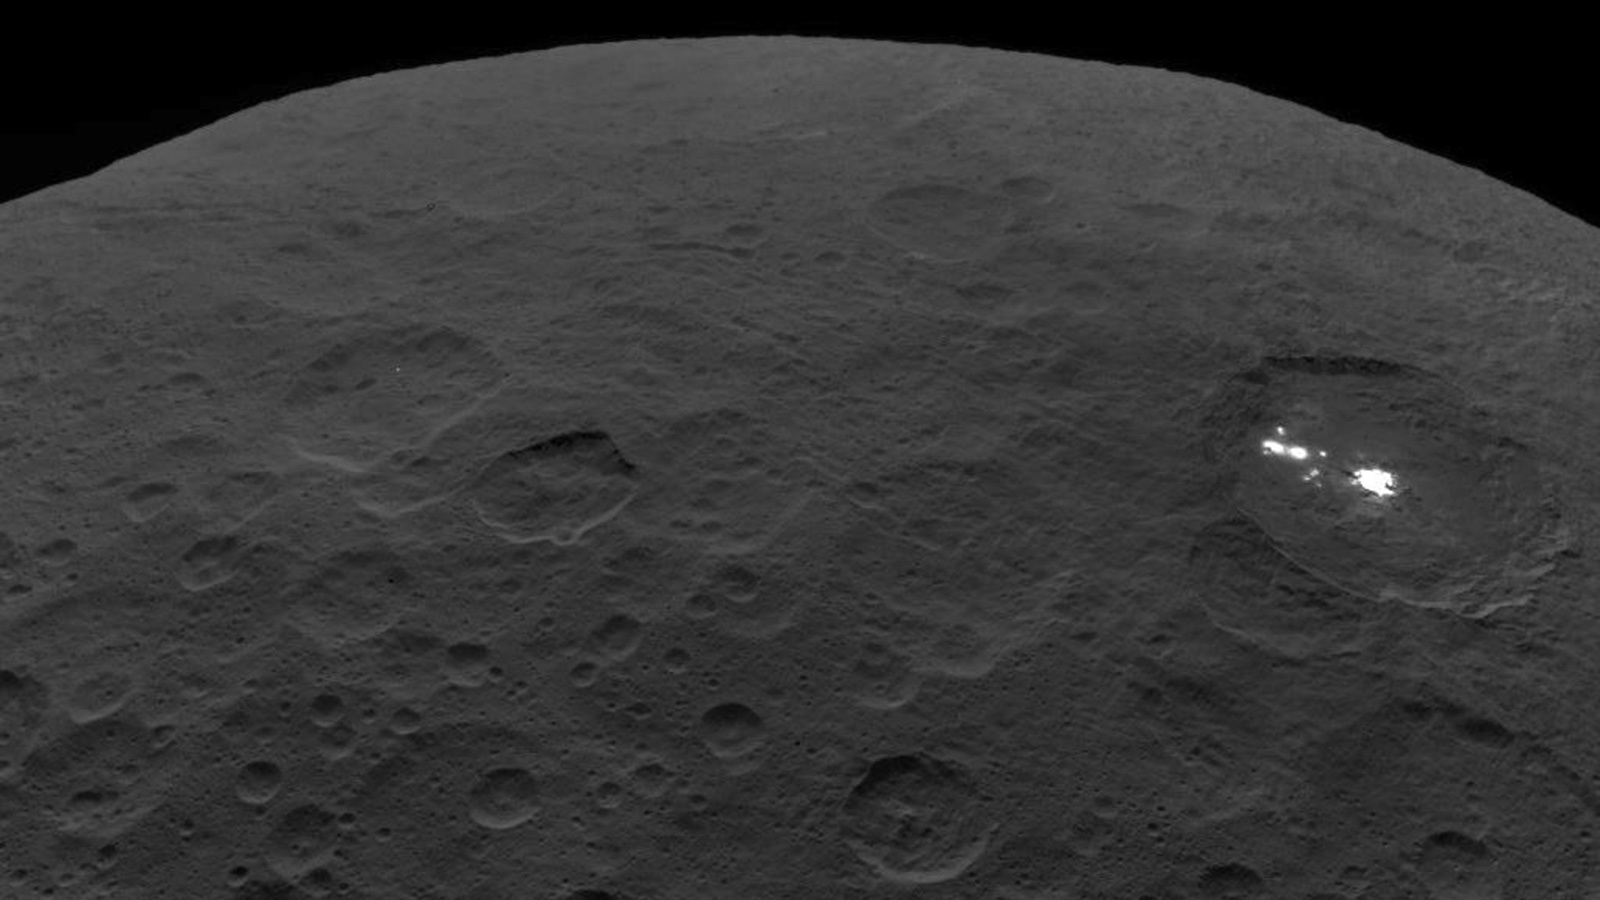 Close view of Ceres with bright white spot visible in crater.